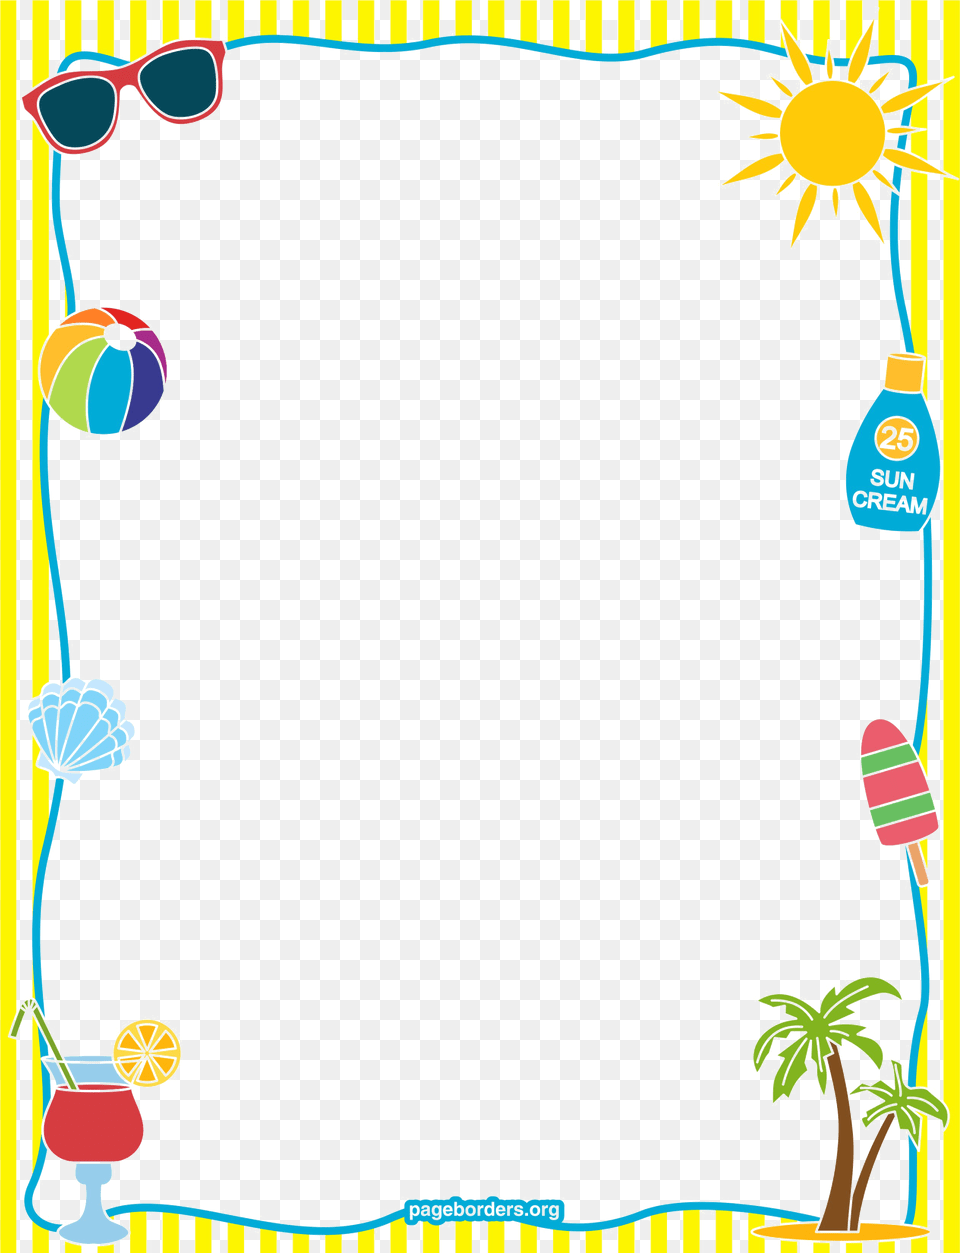 School Border Summer Borders And Frames, Accessories, Sunglasses, Outdoors, Ball Png Image